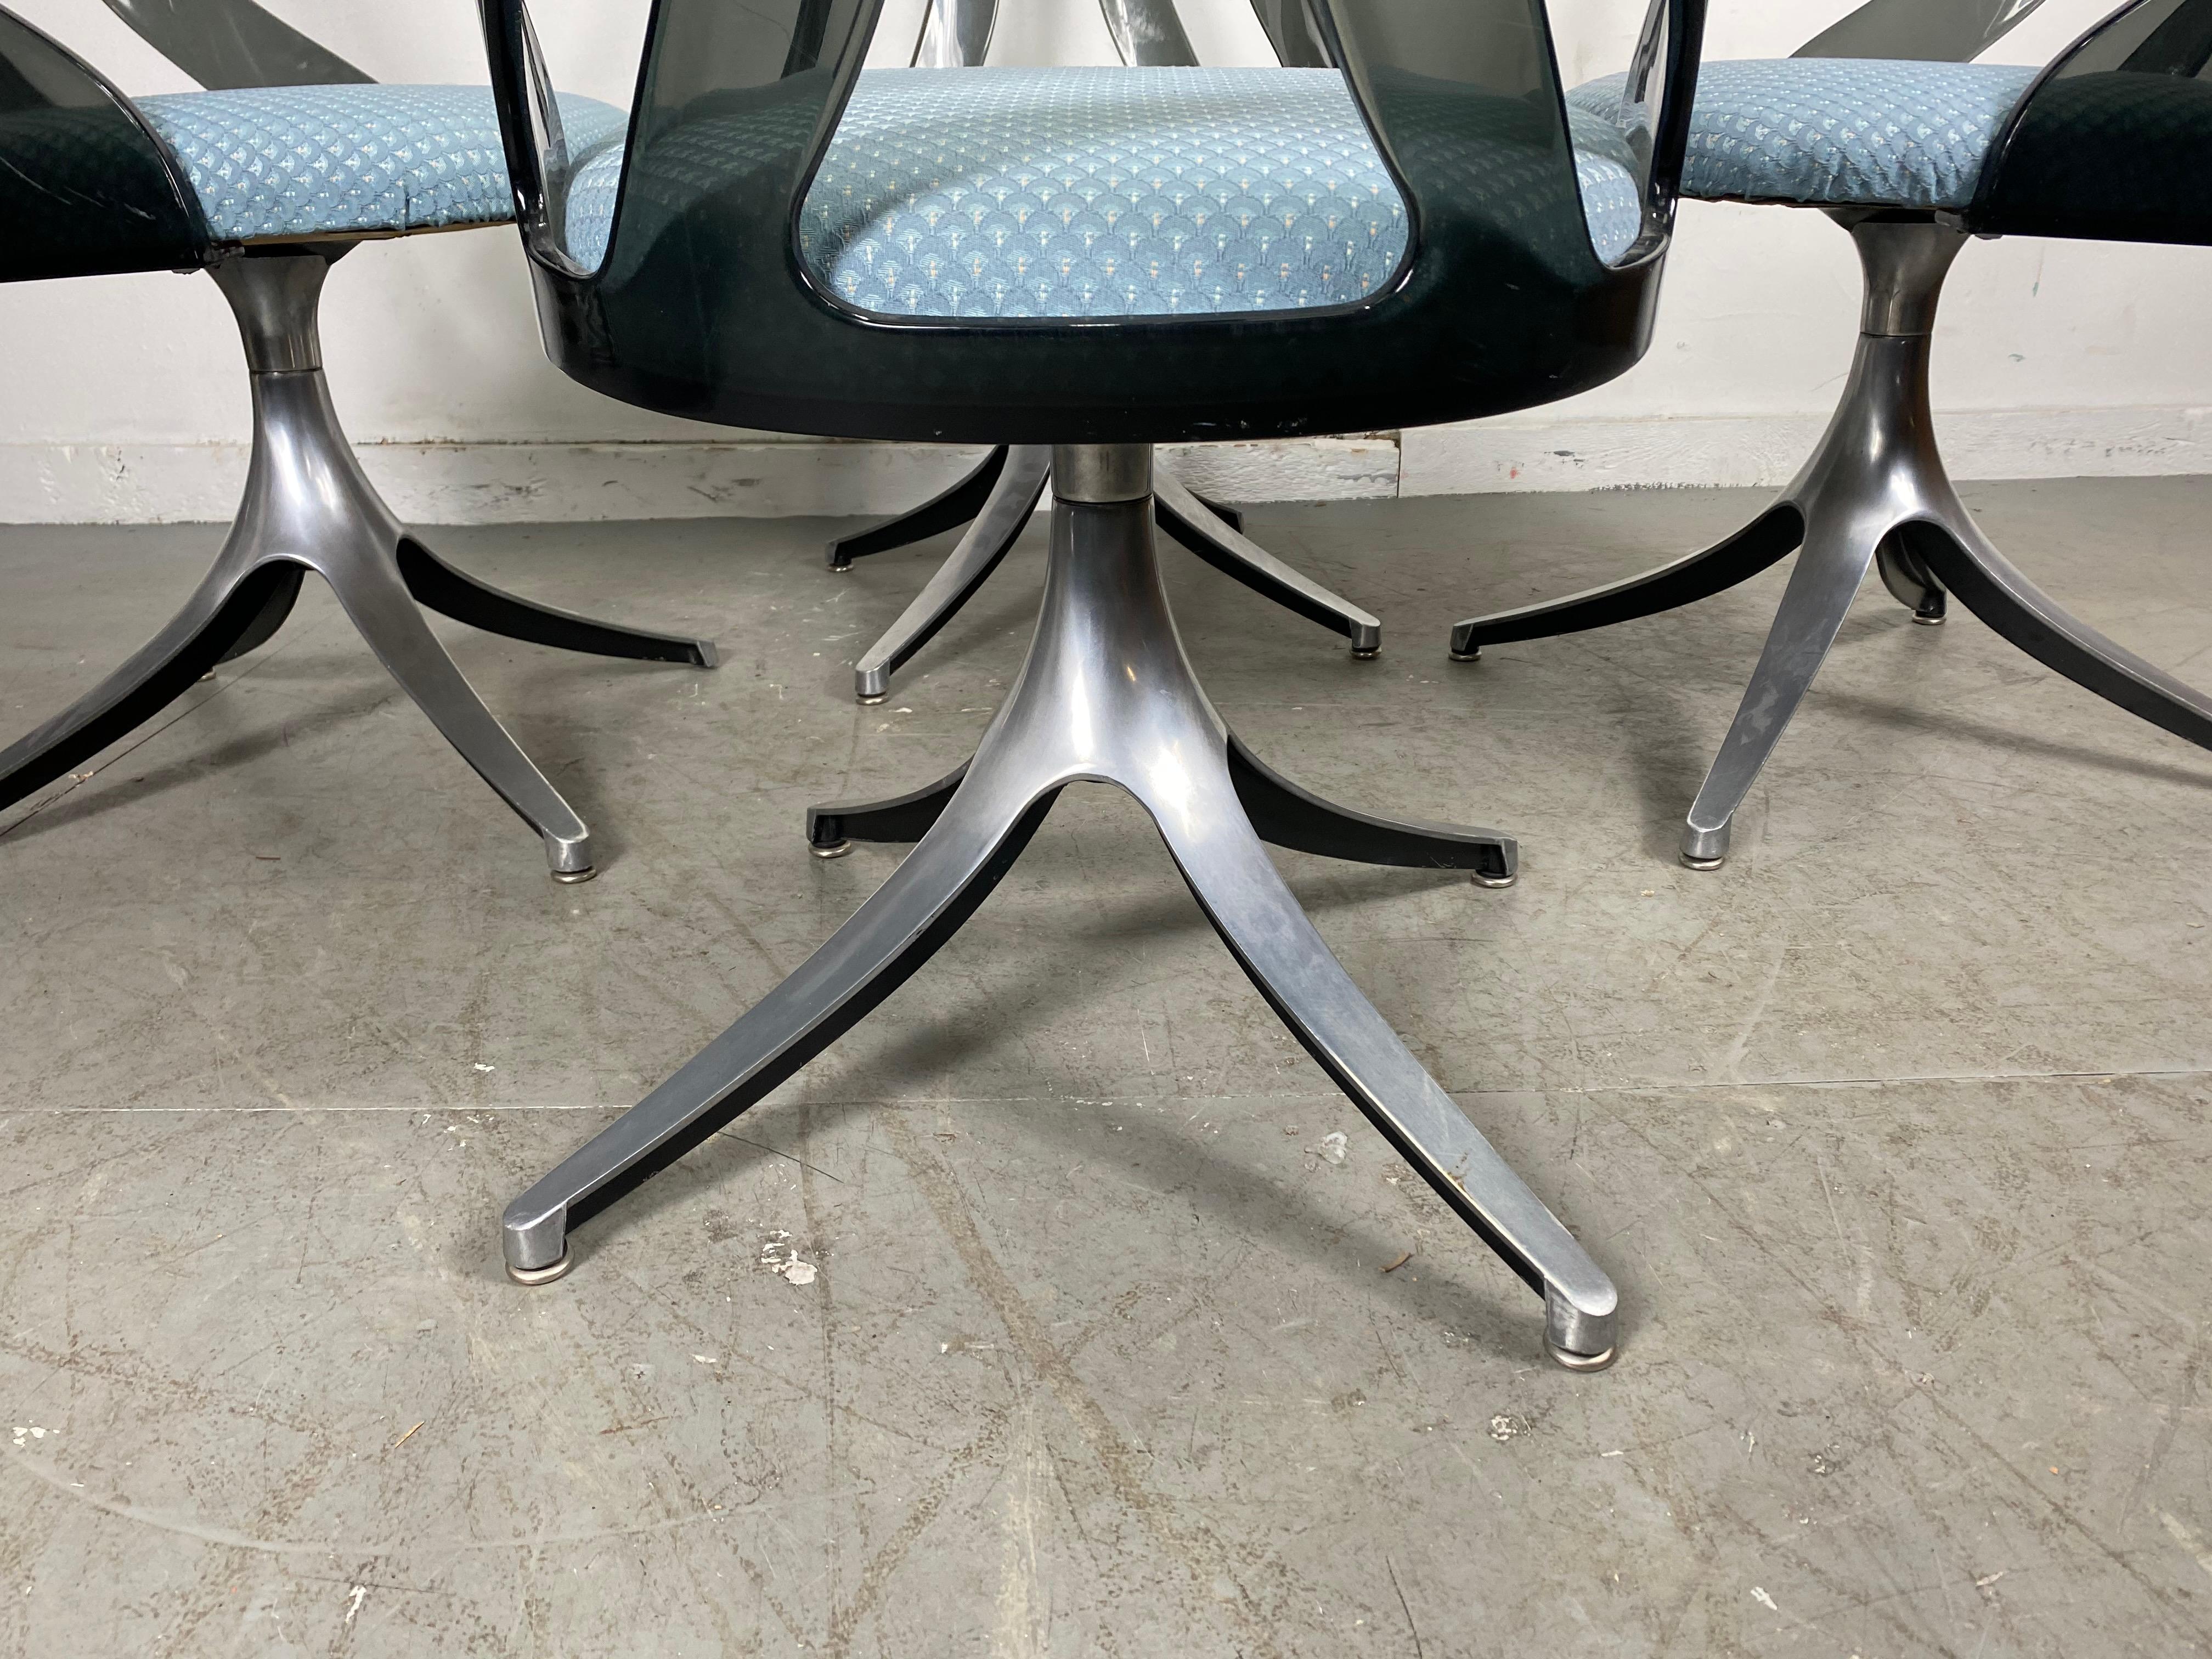 North American Modern Space Age Smoke Lucite and Chrome Dining Chairs by Howell / Interlake